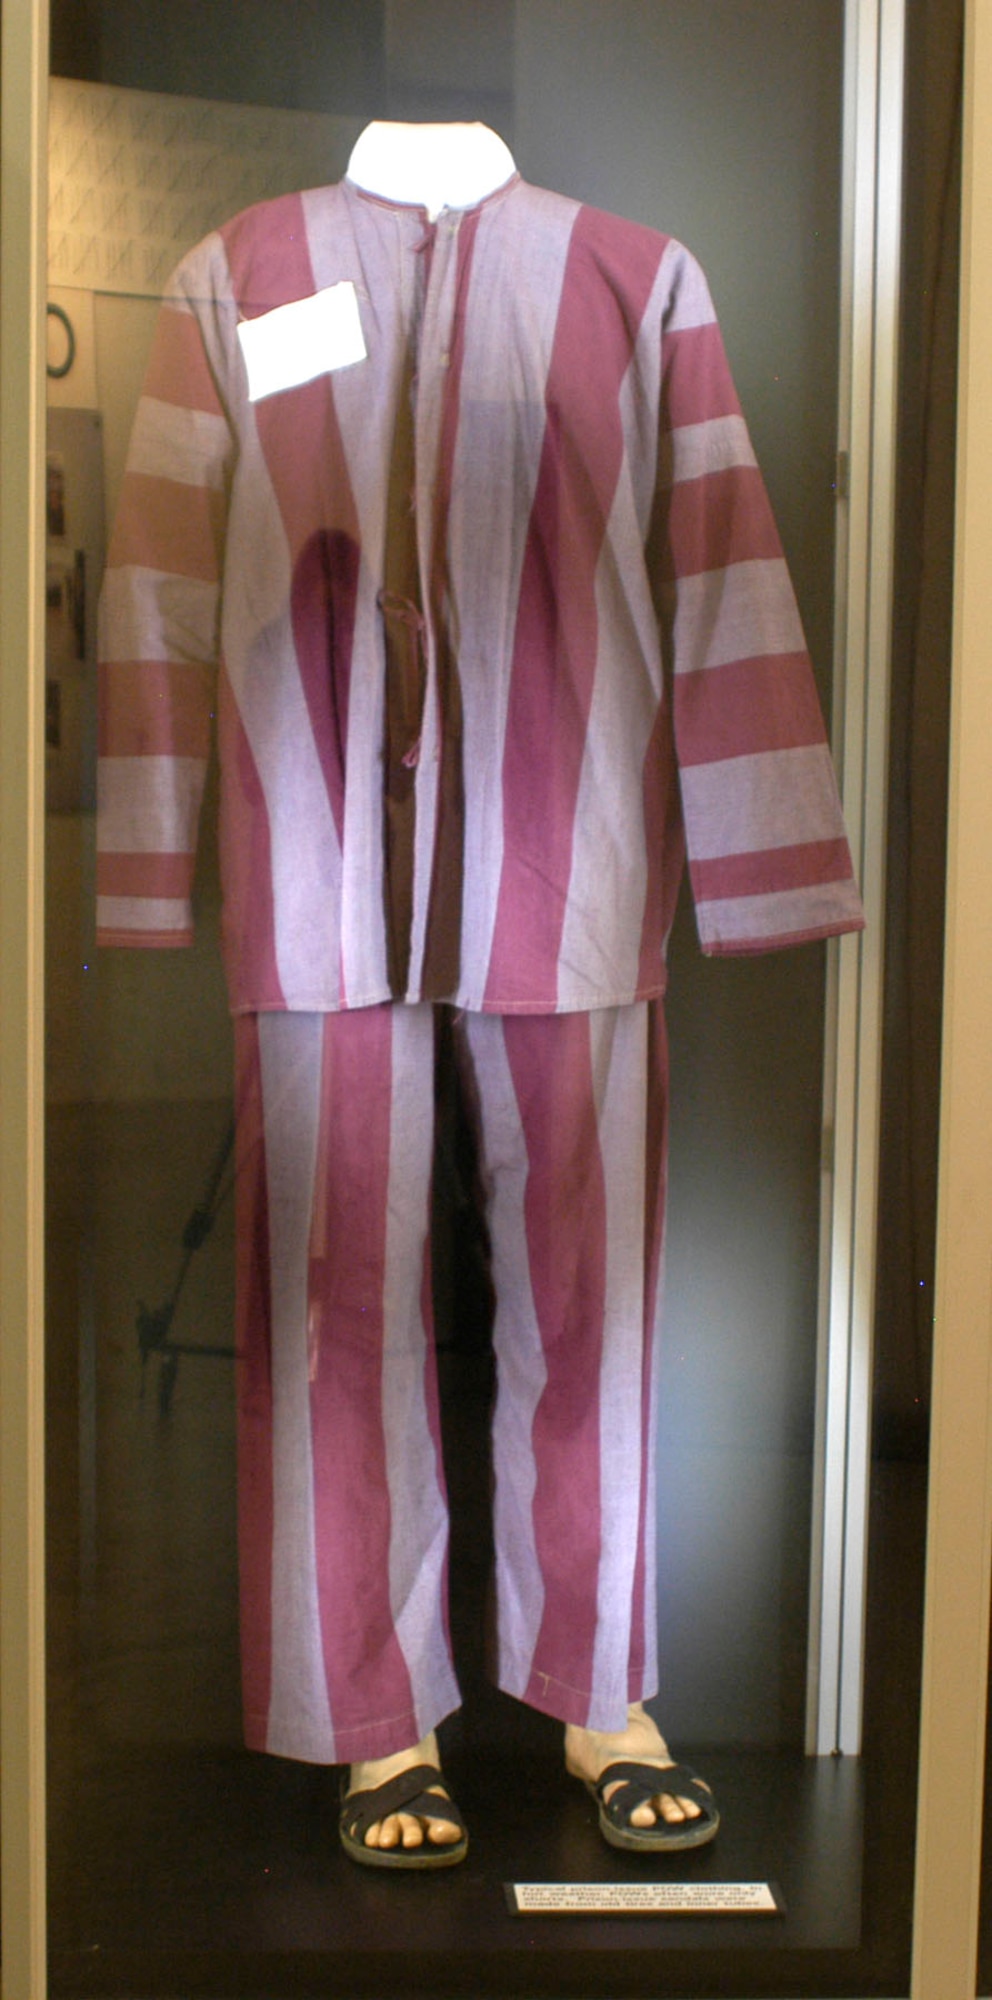 DAYTON, Ohio - Prison-issue POW clothing on display in the Southeast Asia War Gallery at the National Museum of the U.S. Air Force. (U.S. Air Force photo)